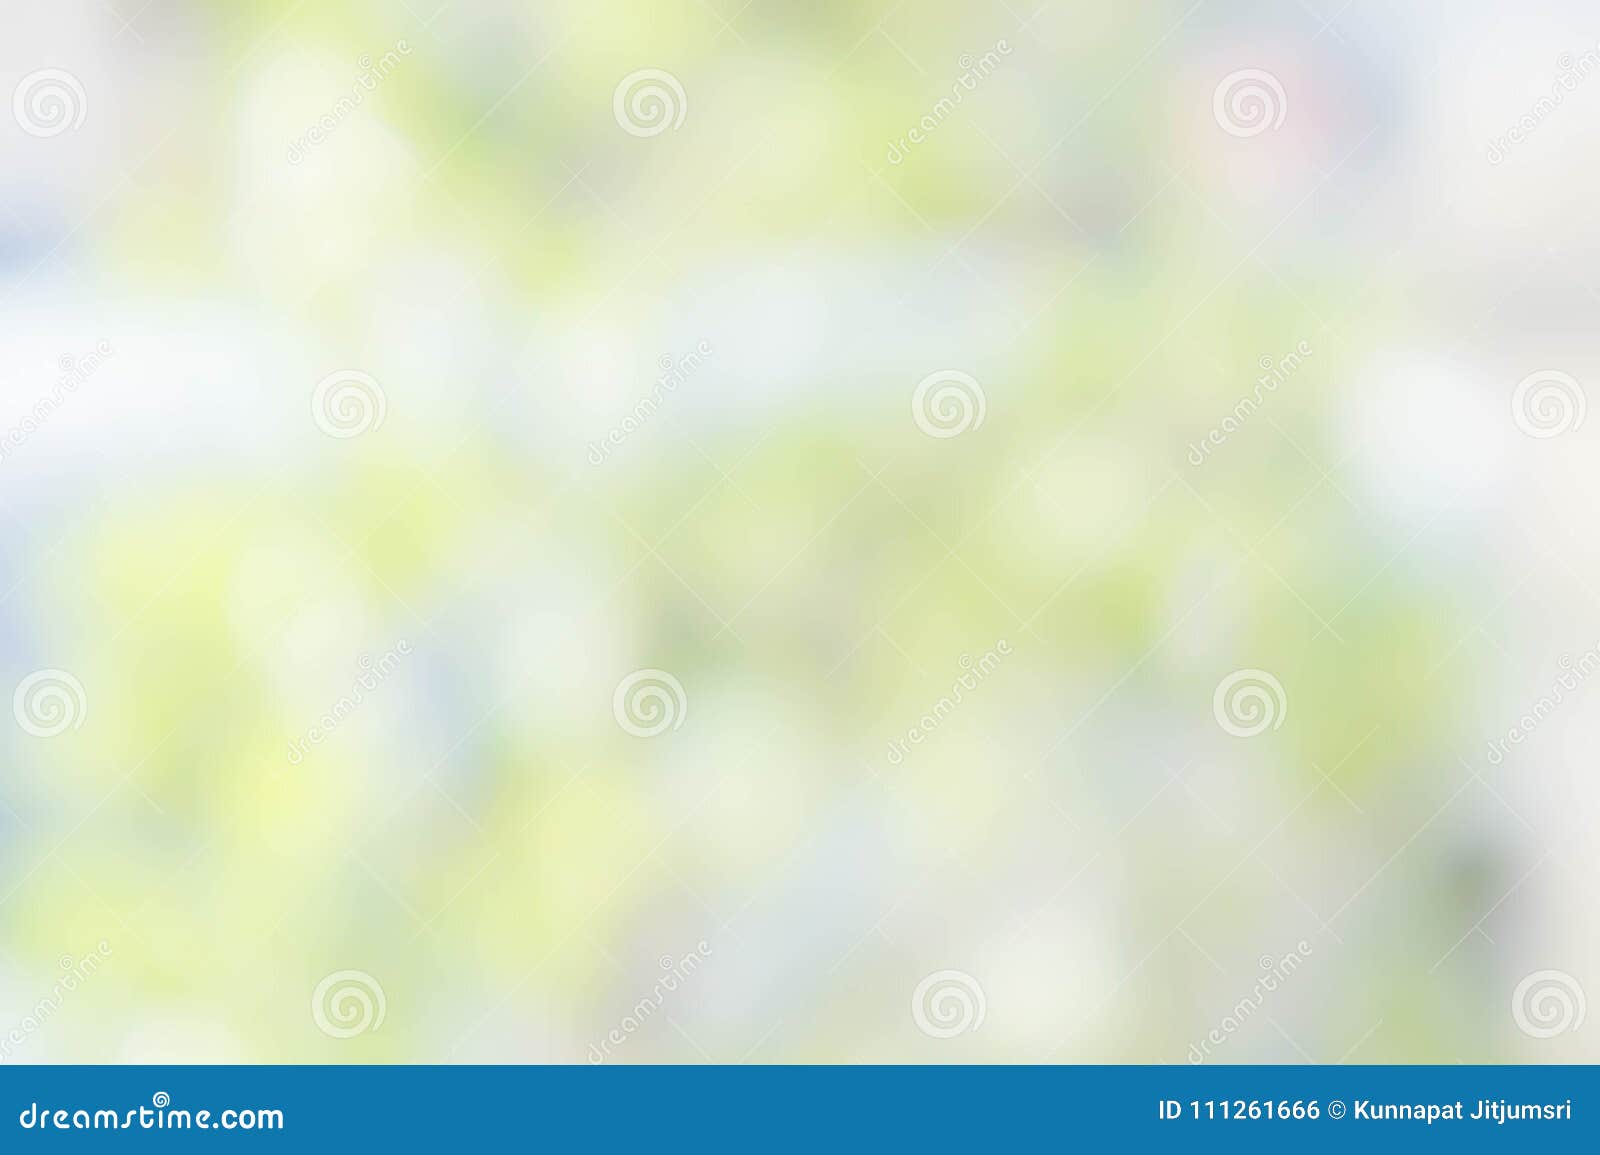 Texture Nature Blur Background , Light Blur Green and White Back Stock  Photo - Image of bright, blur: 111261666